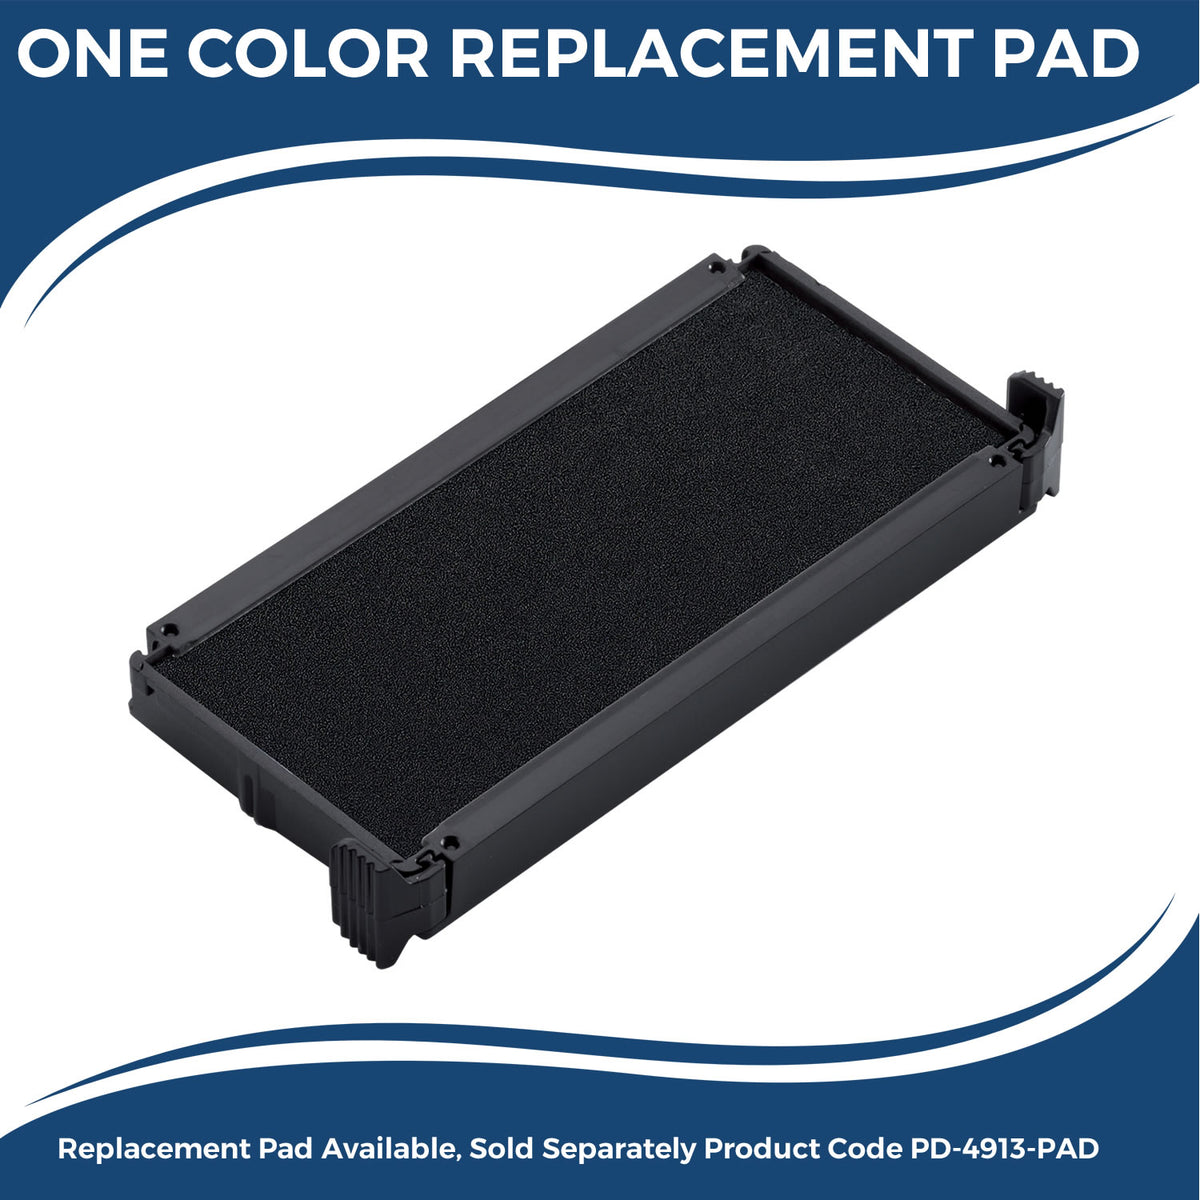 Large Self-Inking Credito Stamp 5531S Large Replacment Pad